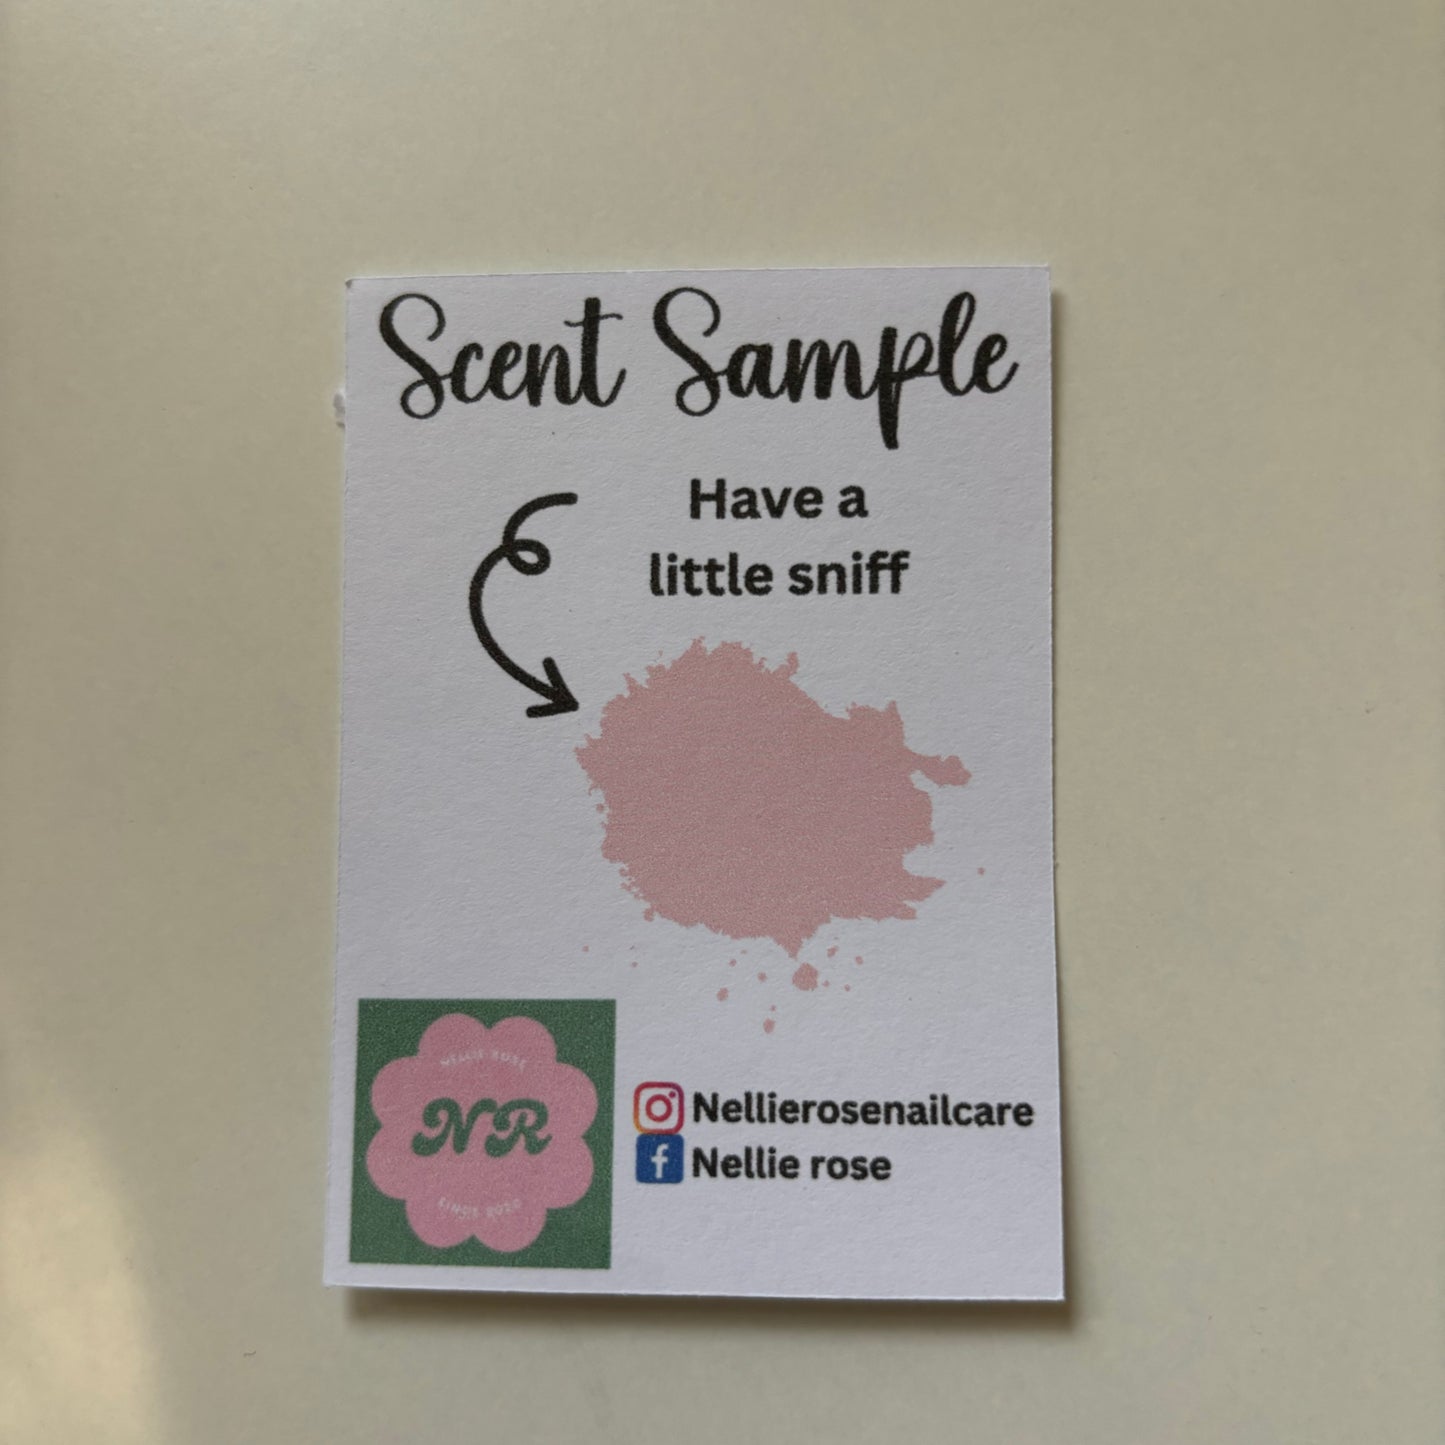 Sample scent cards